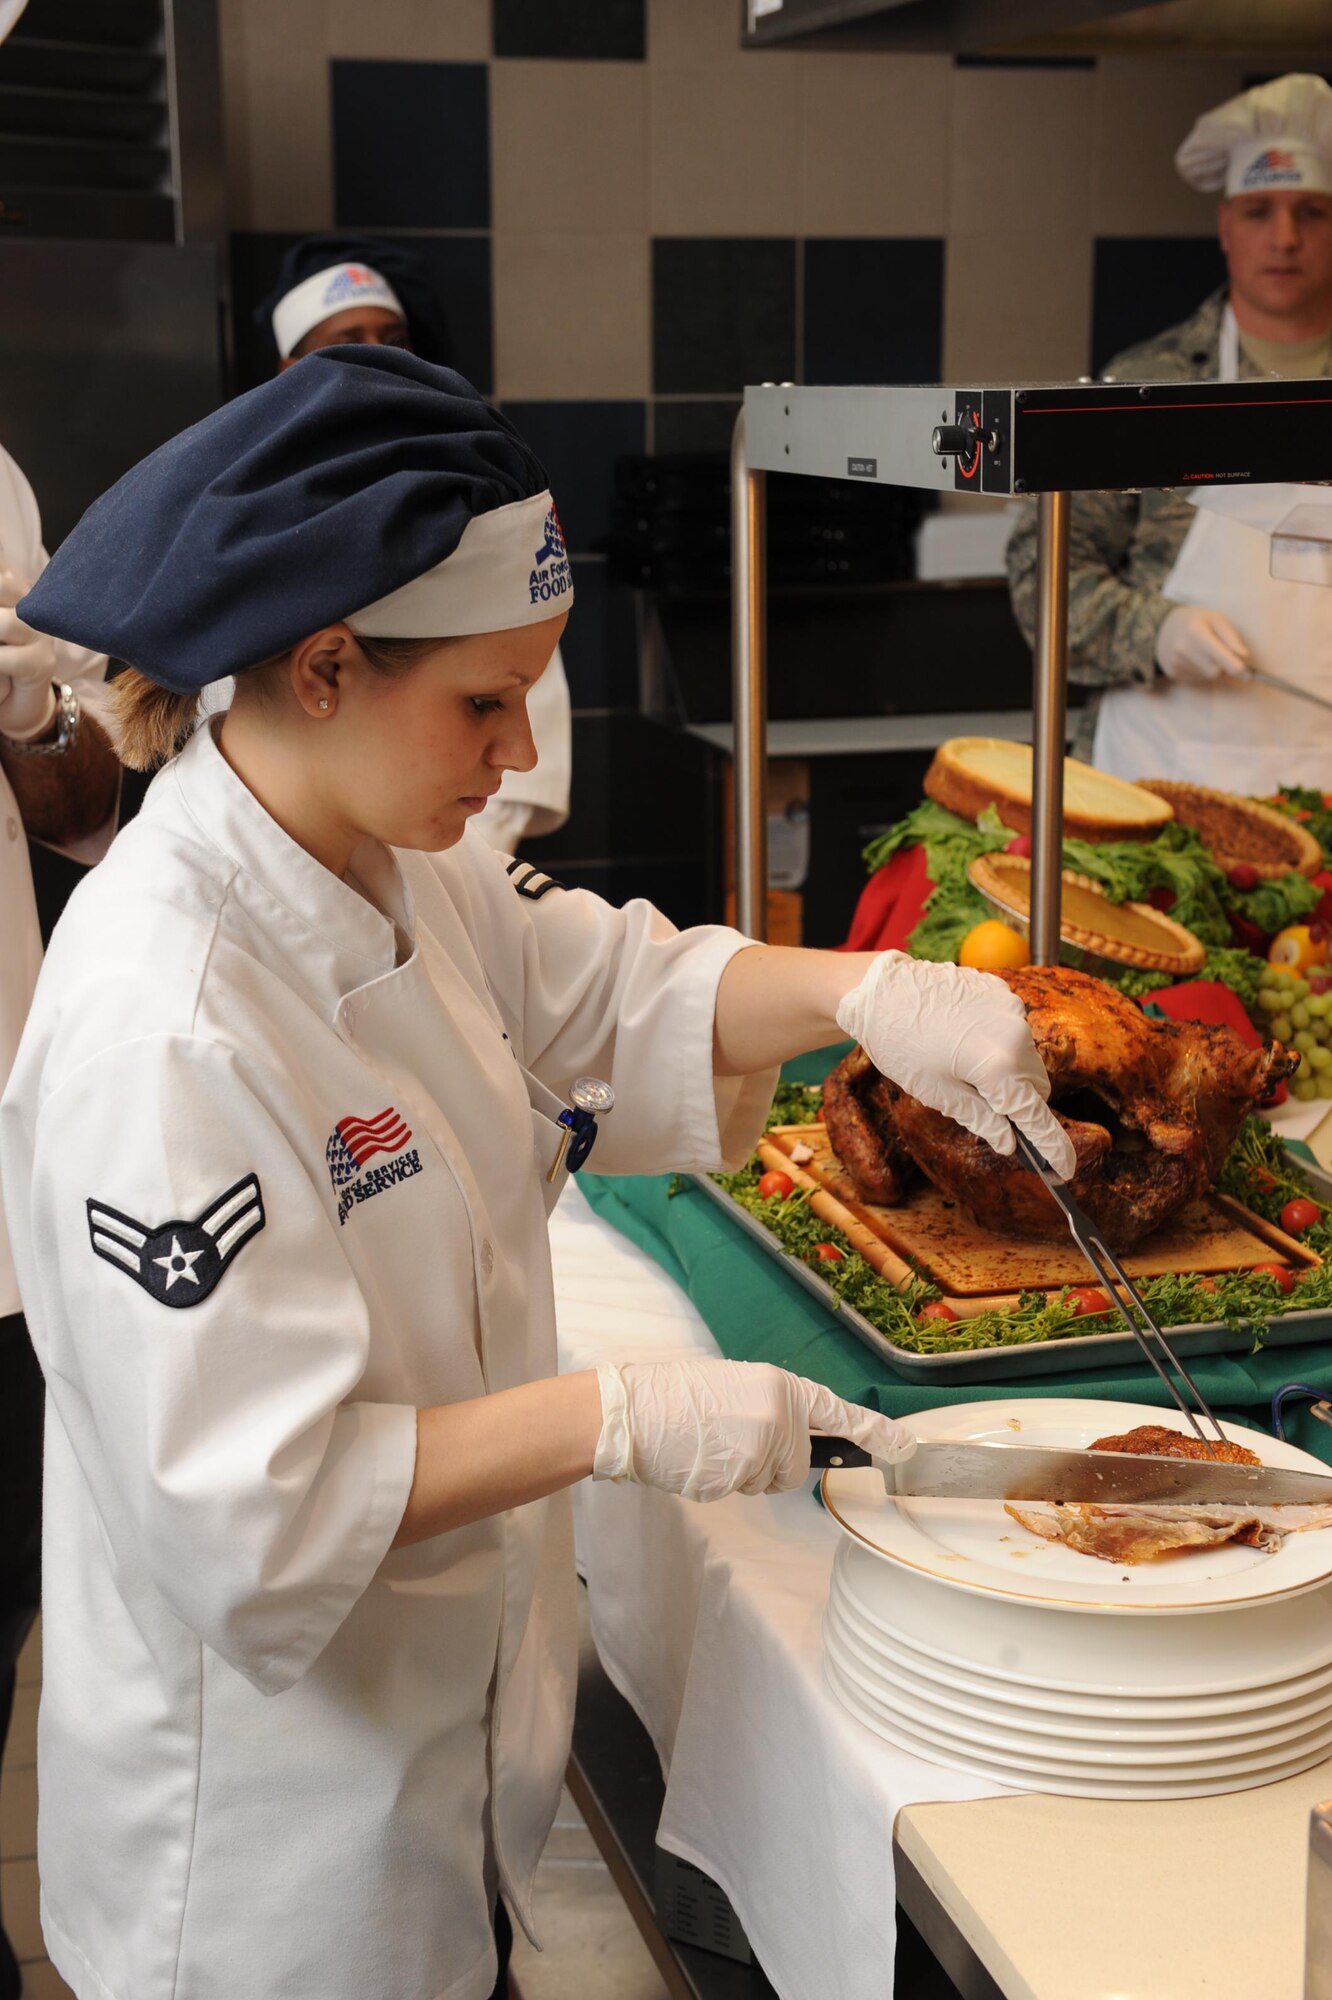 A female food service worker in white jacket and blue chefs hat, cuts turkey on a plate.